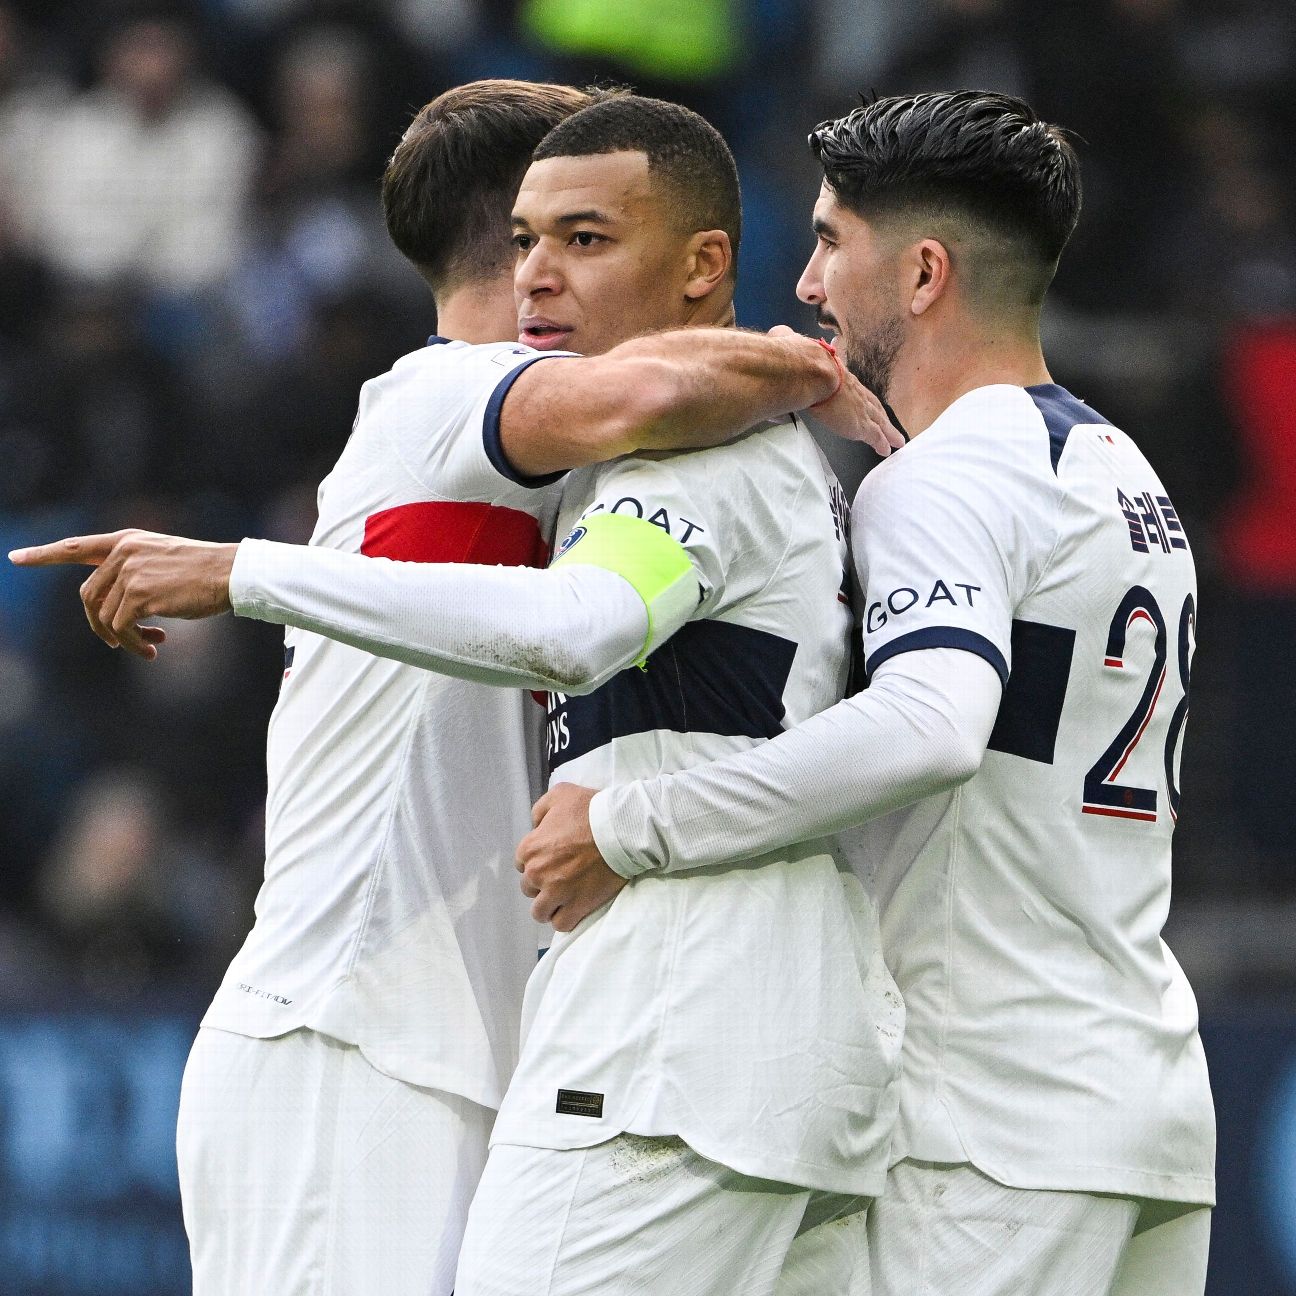 Ten-man PSG extend lead at top of table with win at Le Havre